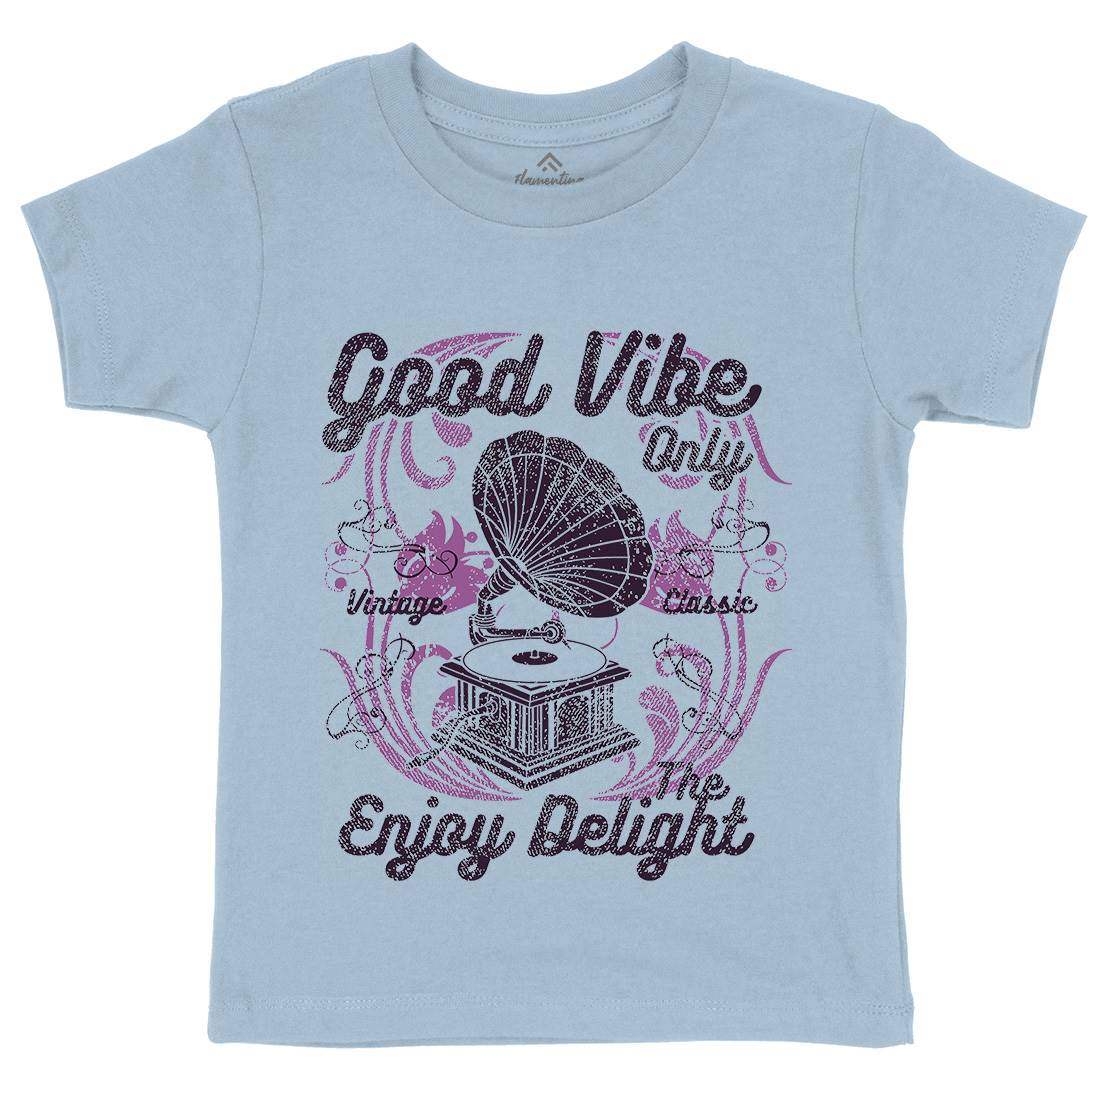 Good Vibe Only Kids Crew Neck T-Shirt Music A059